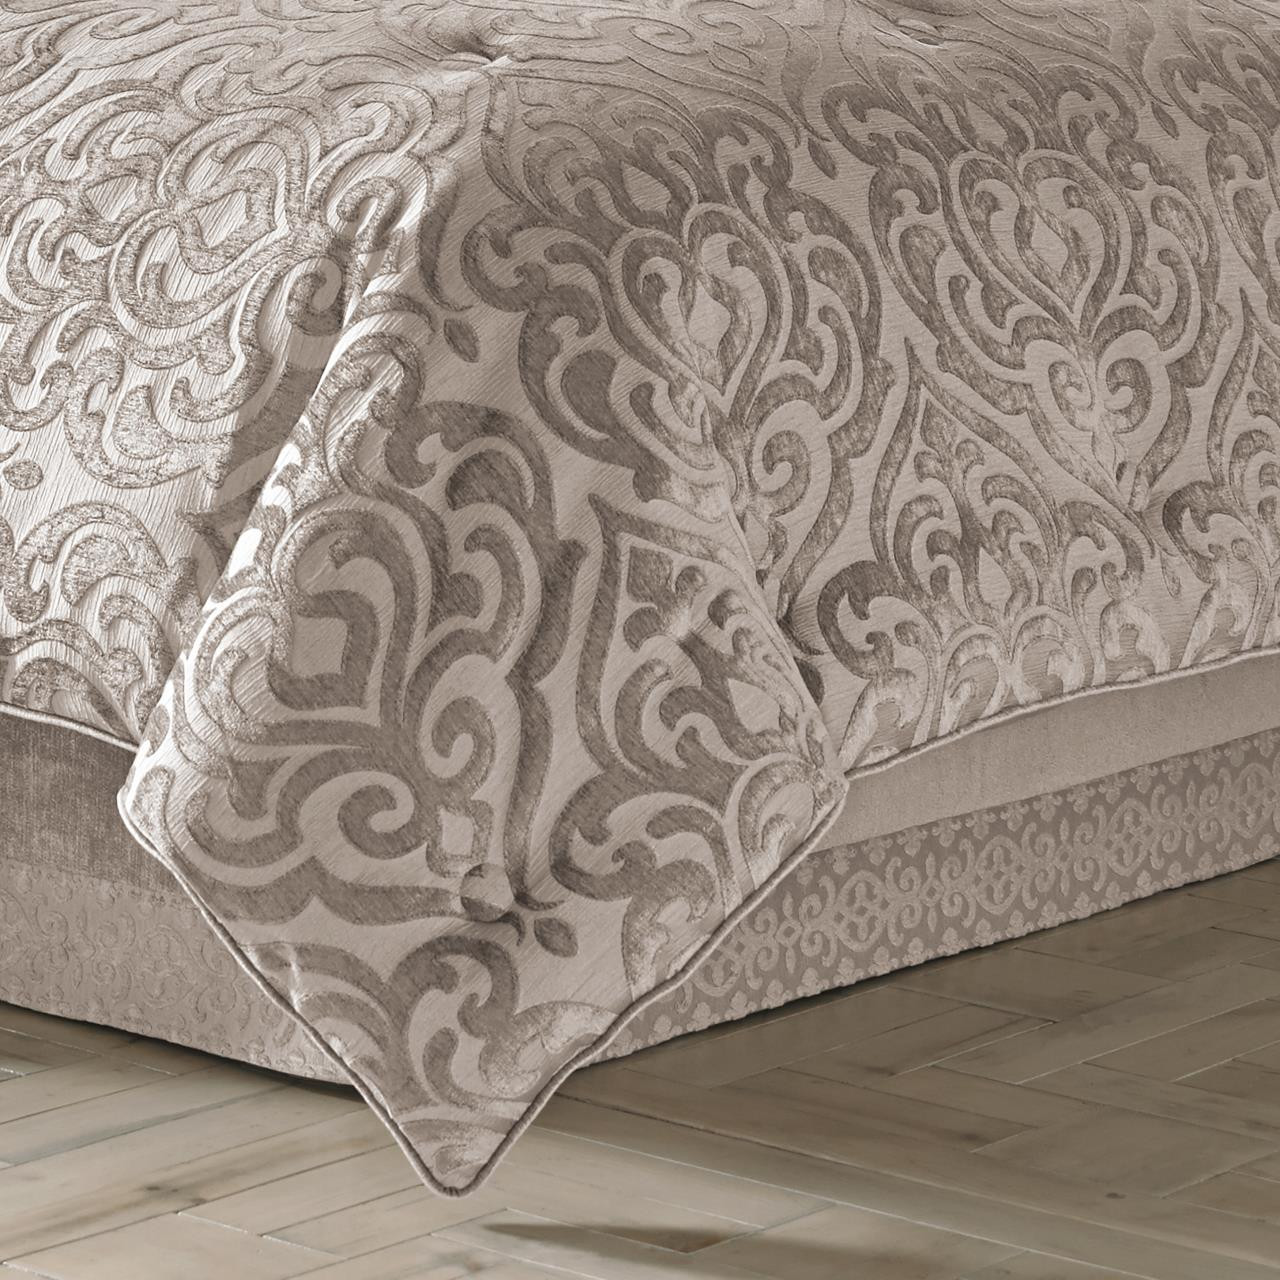 Sicily Pearl Bedding Collection -